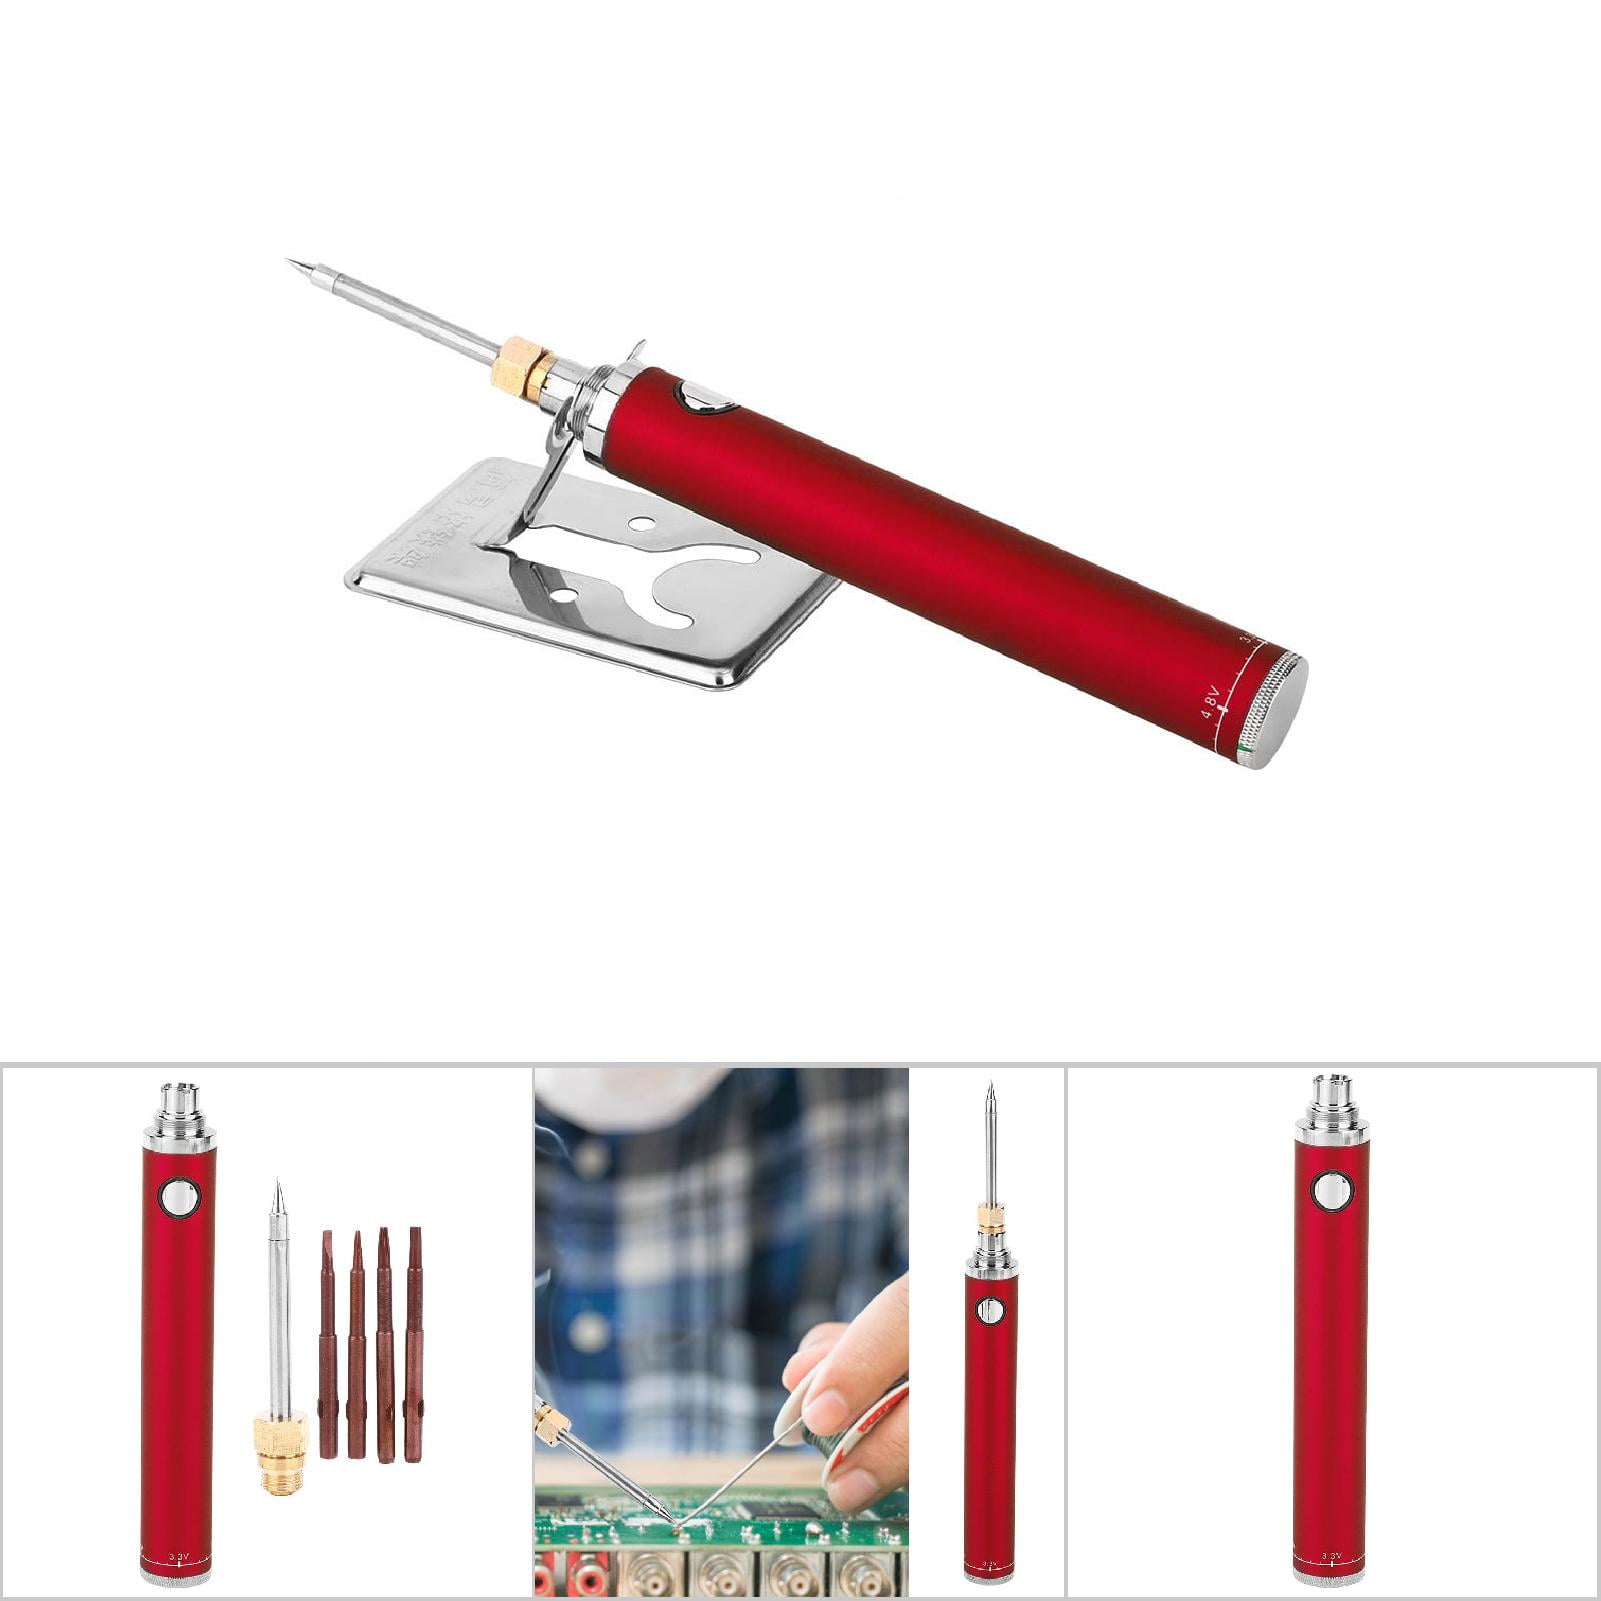 Soldering Iron,1300mAh 5V Anti-Oxidation Portable Rechargeable Soldering Pen Mini USB Soldering Iron Kit for Cell Phone Electronic Product Repairing Welding red 